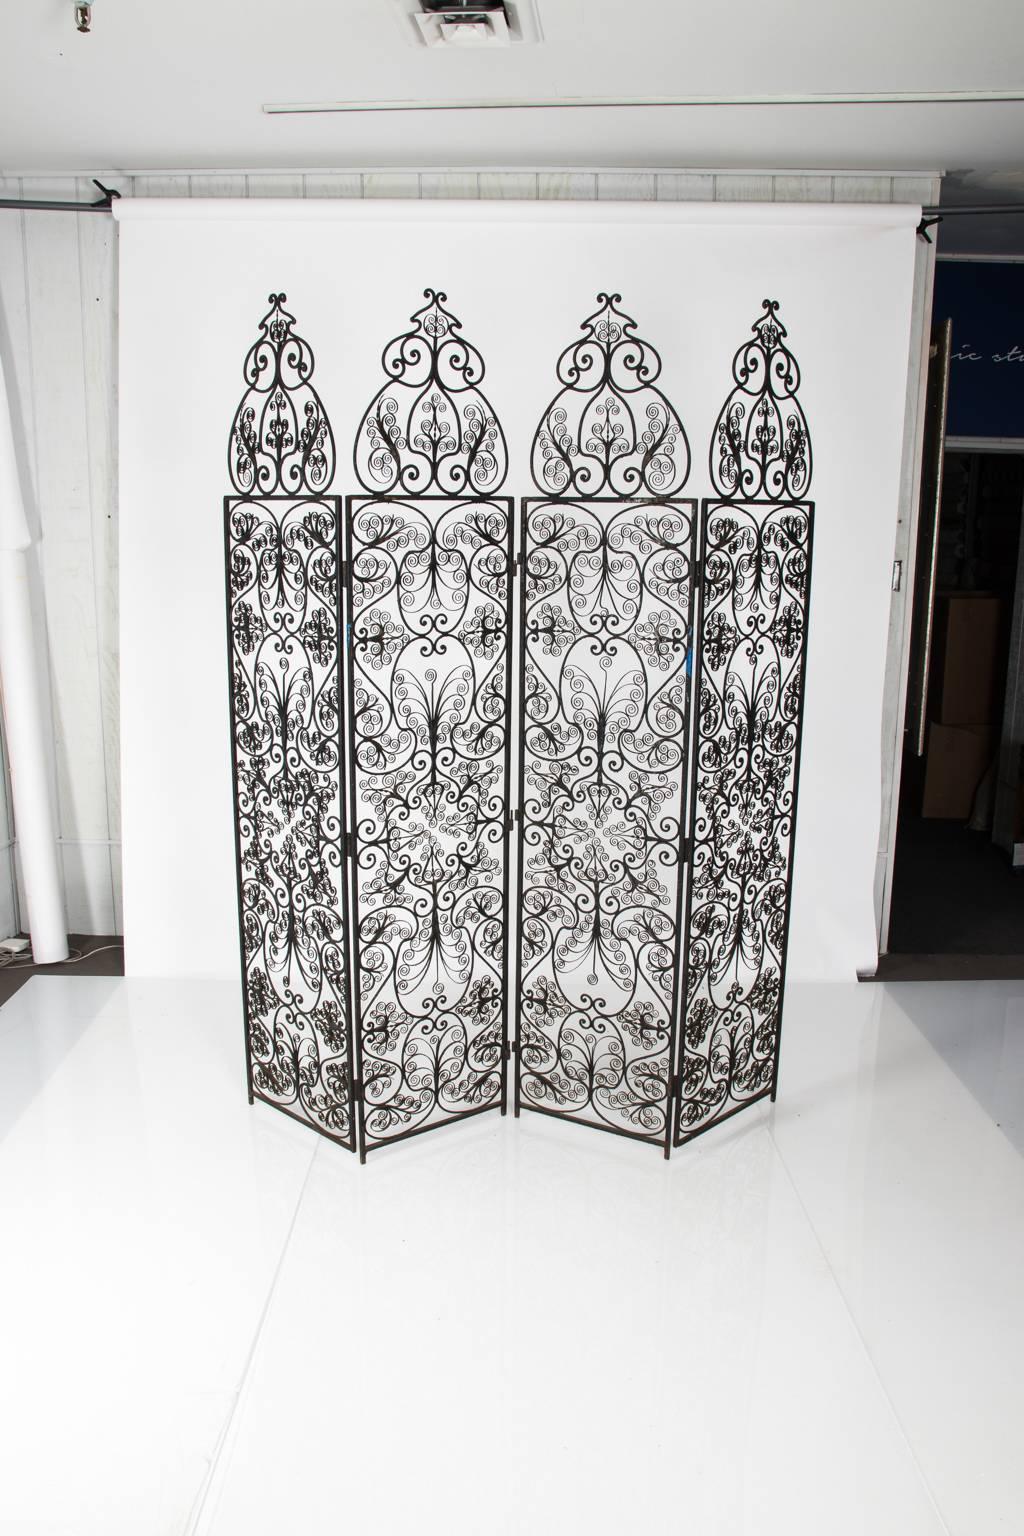 Four-paneled wrought iron screen with intricate scrollwork throughout, circa early 20th century.